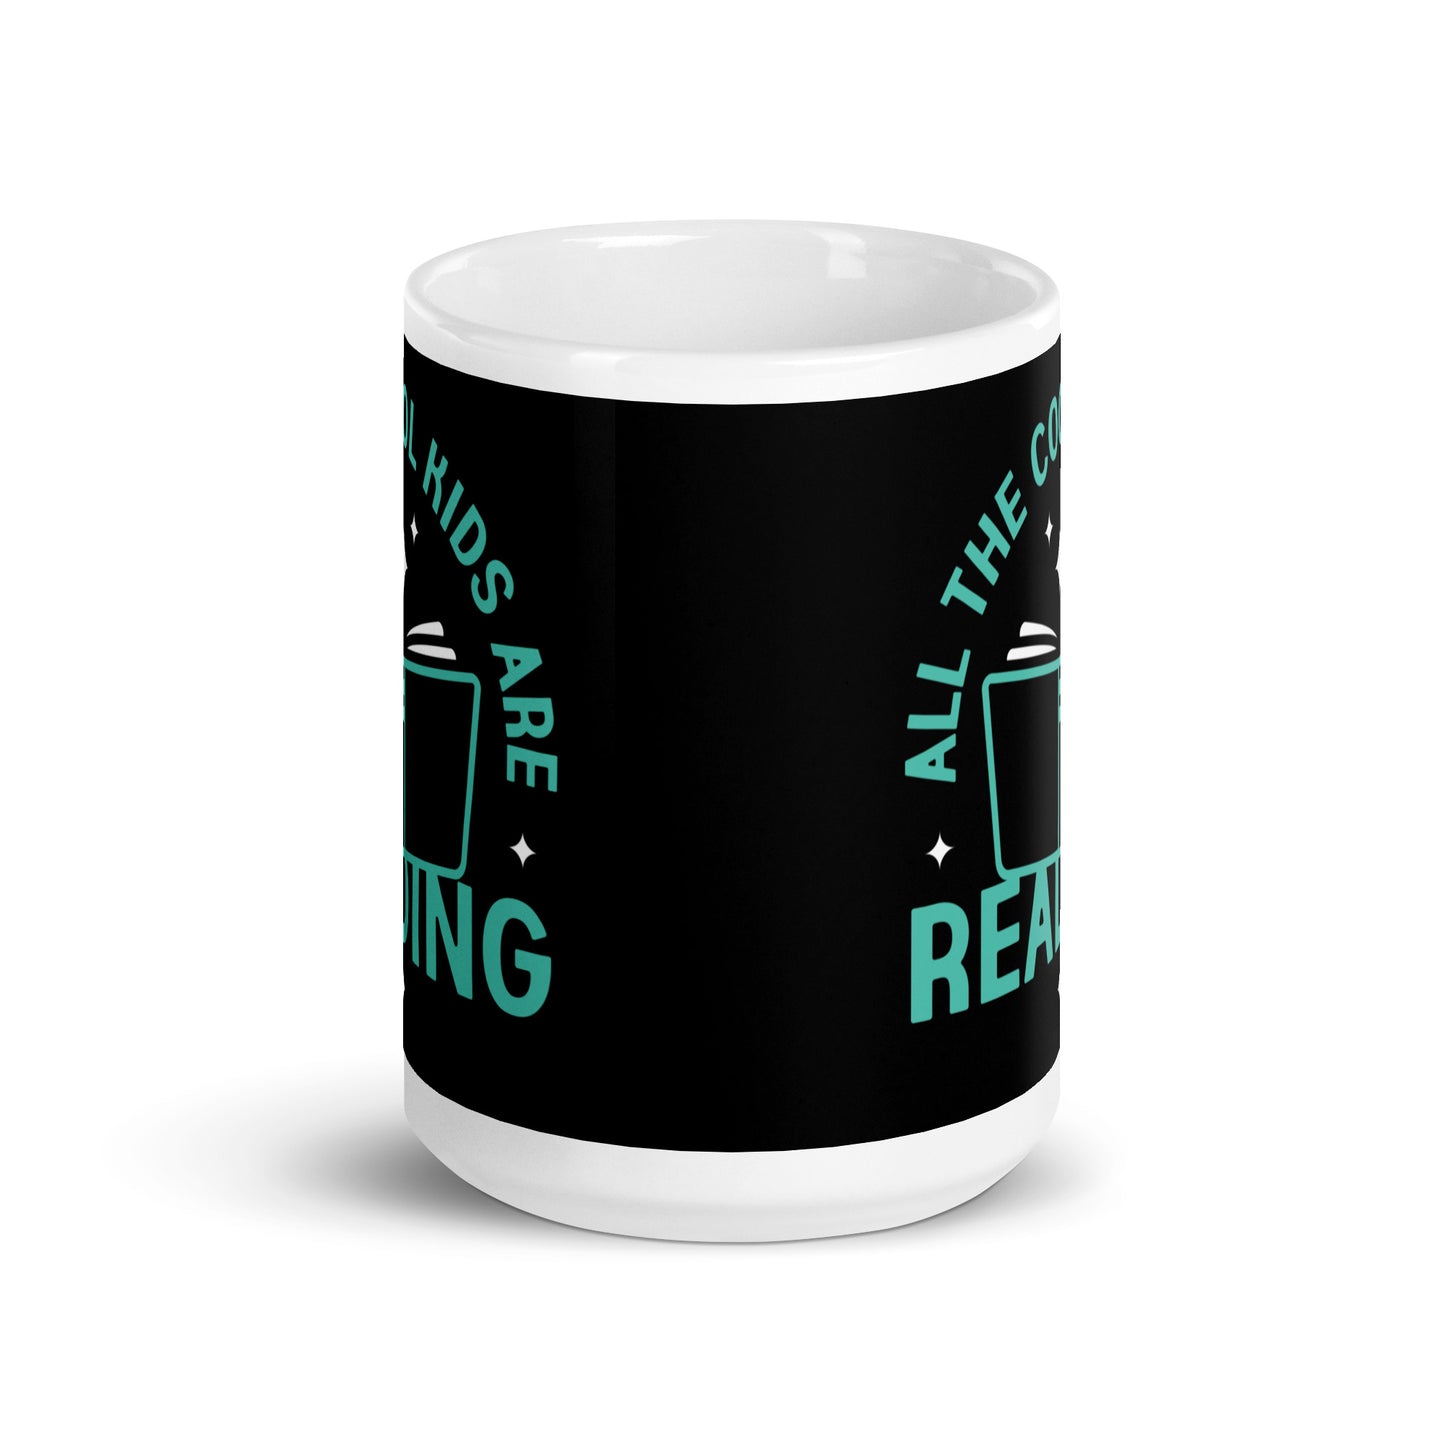 All The Cool Kids Are Reading Mug